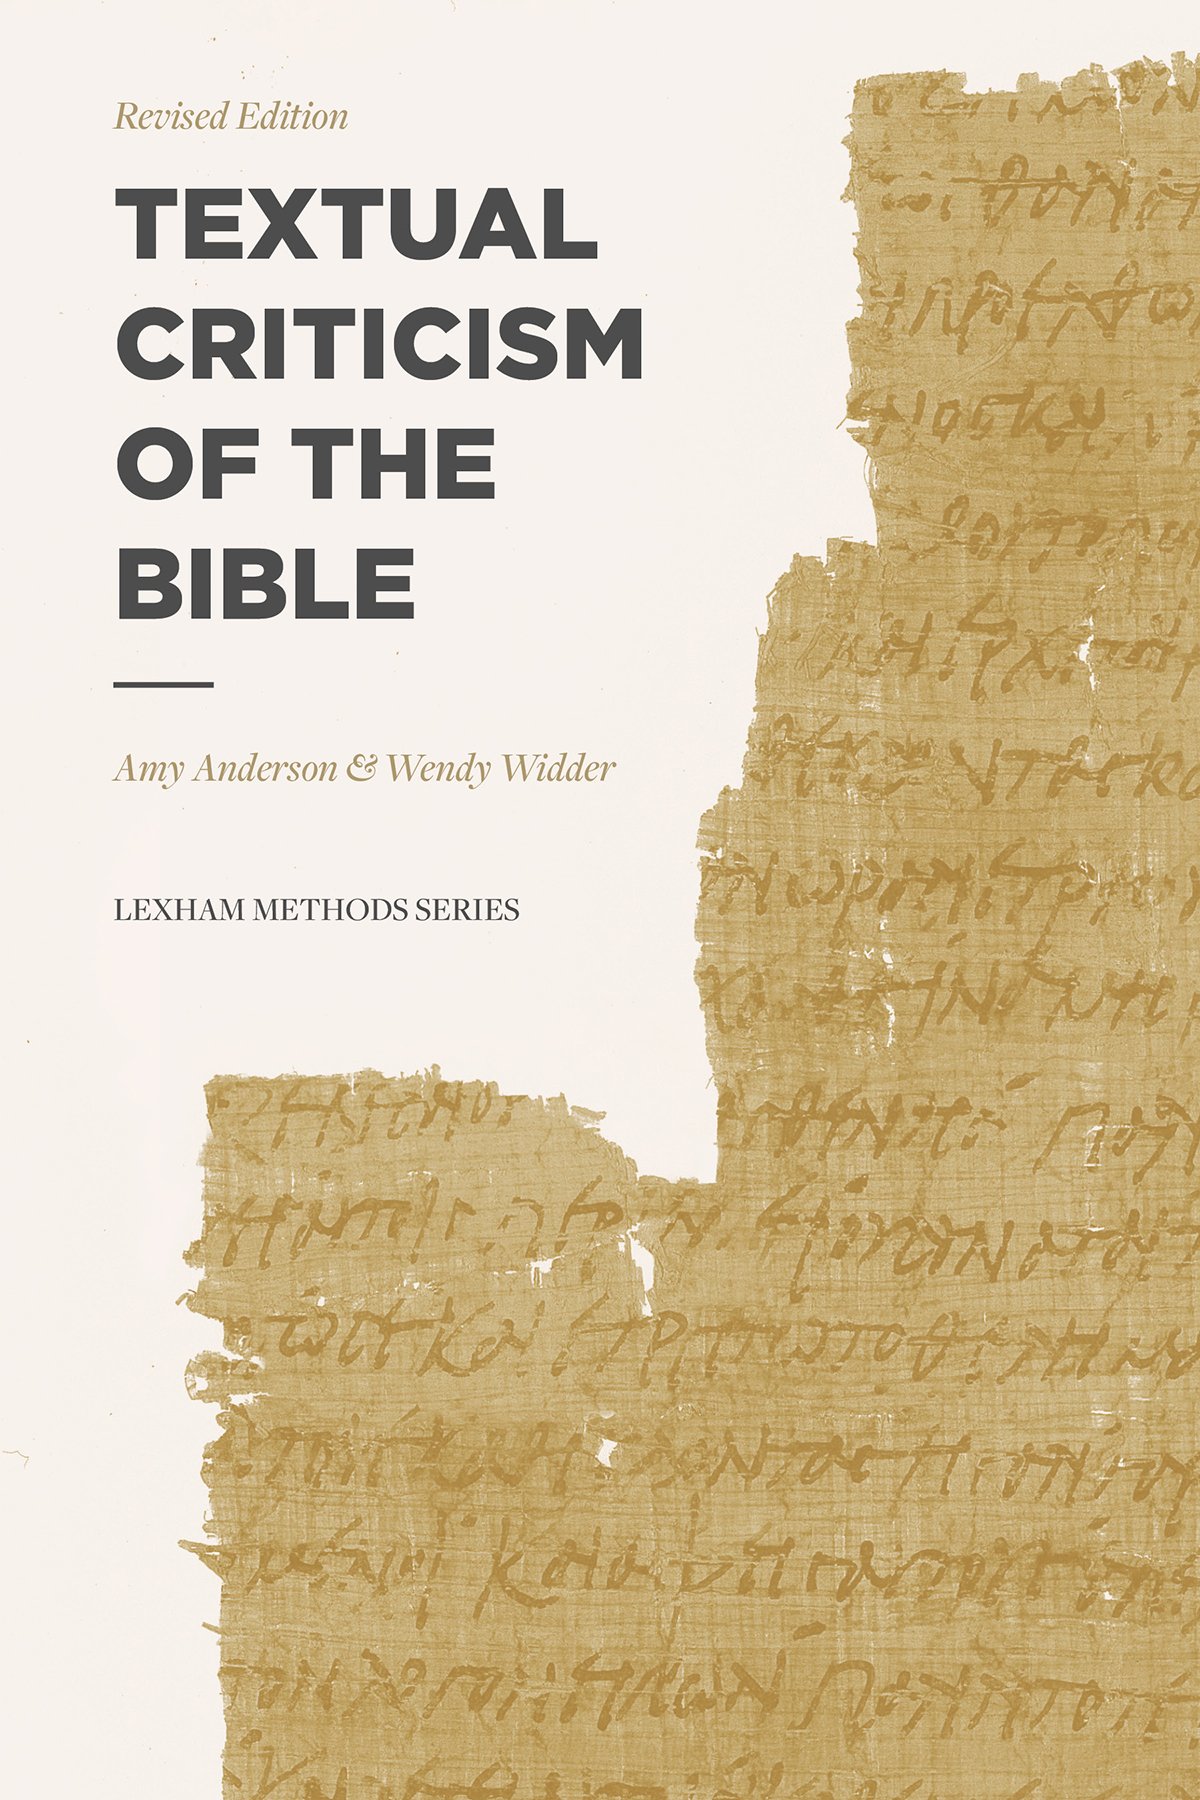 Textual Criticism of the Bible (Lexham Methods Series)